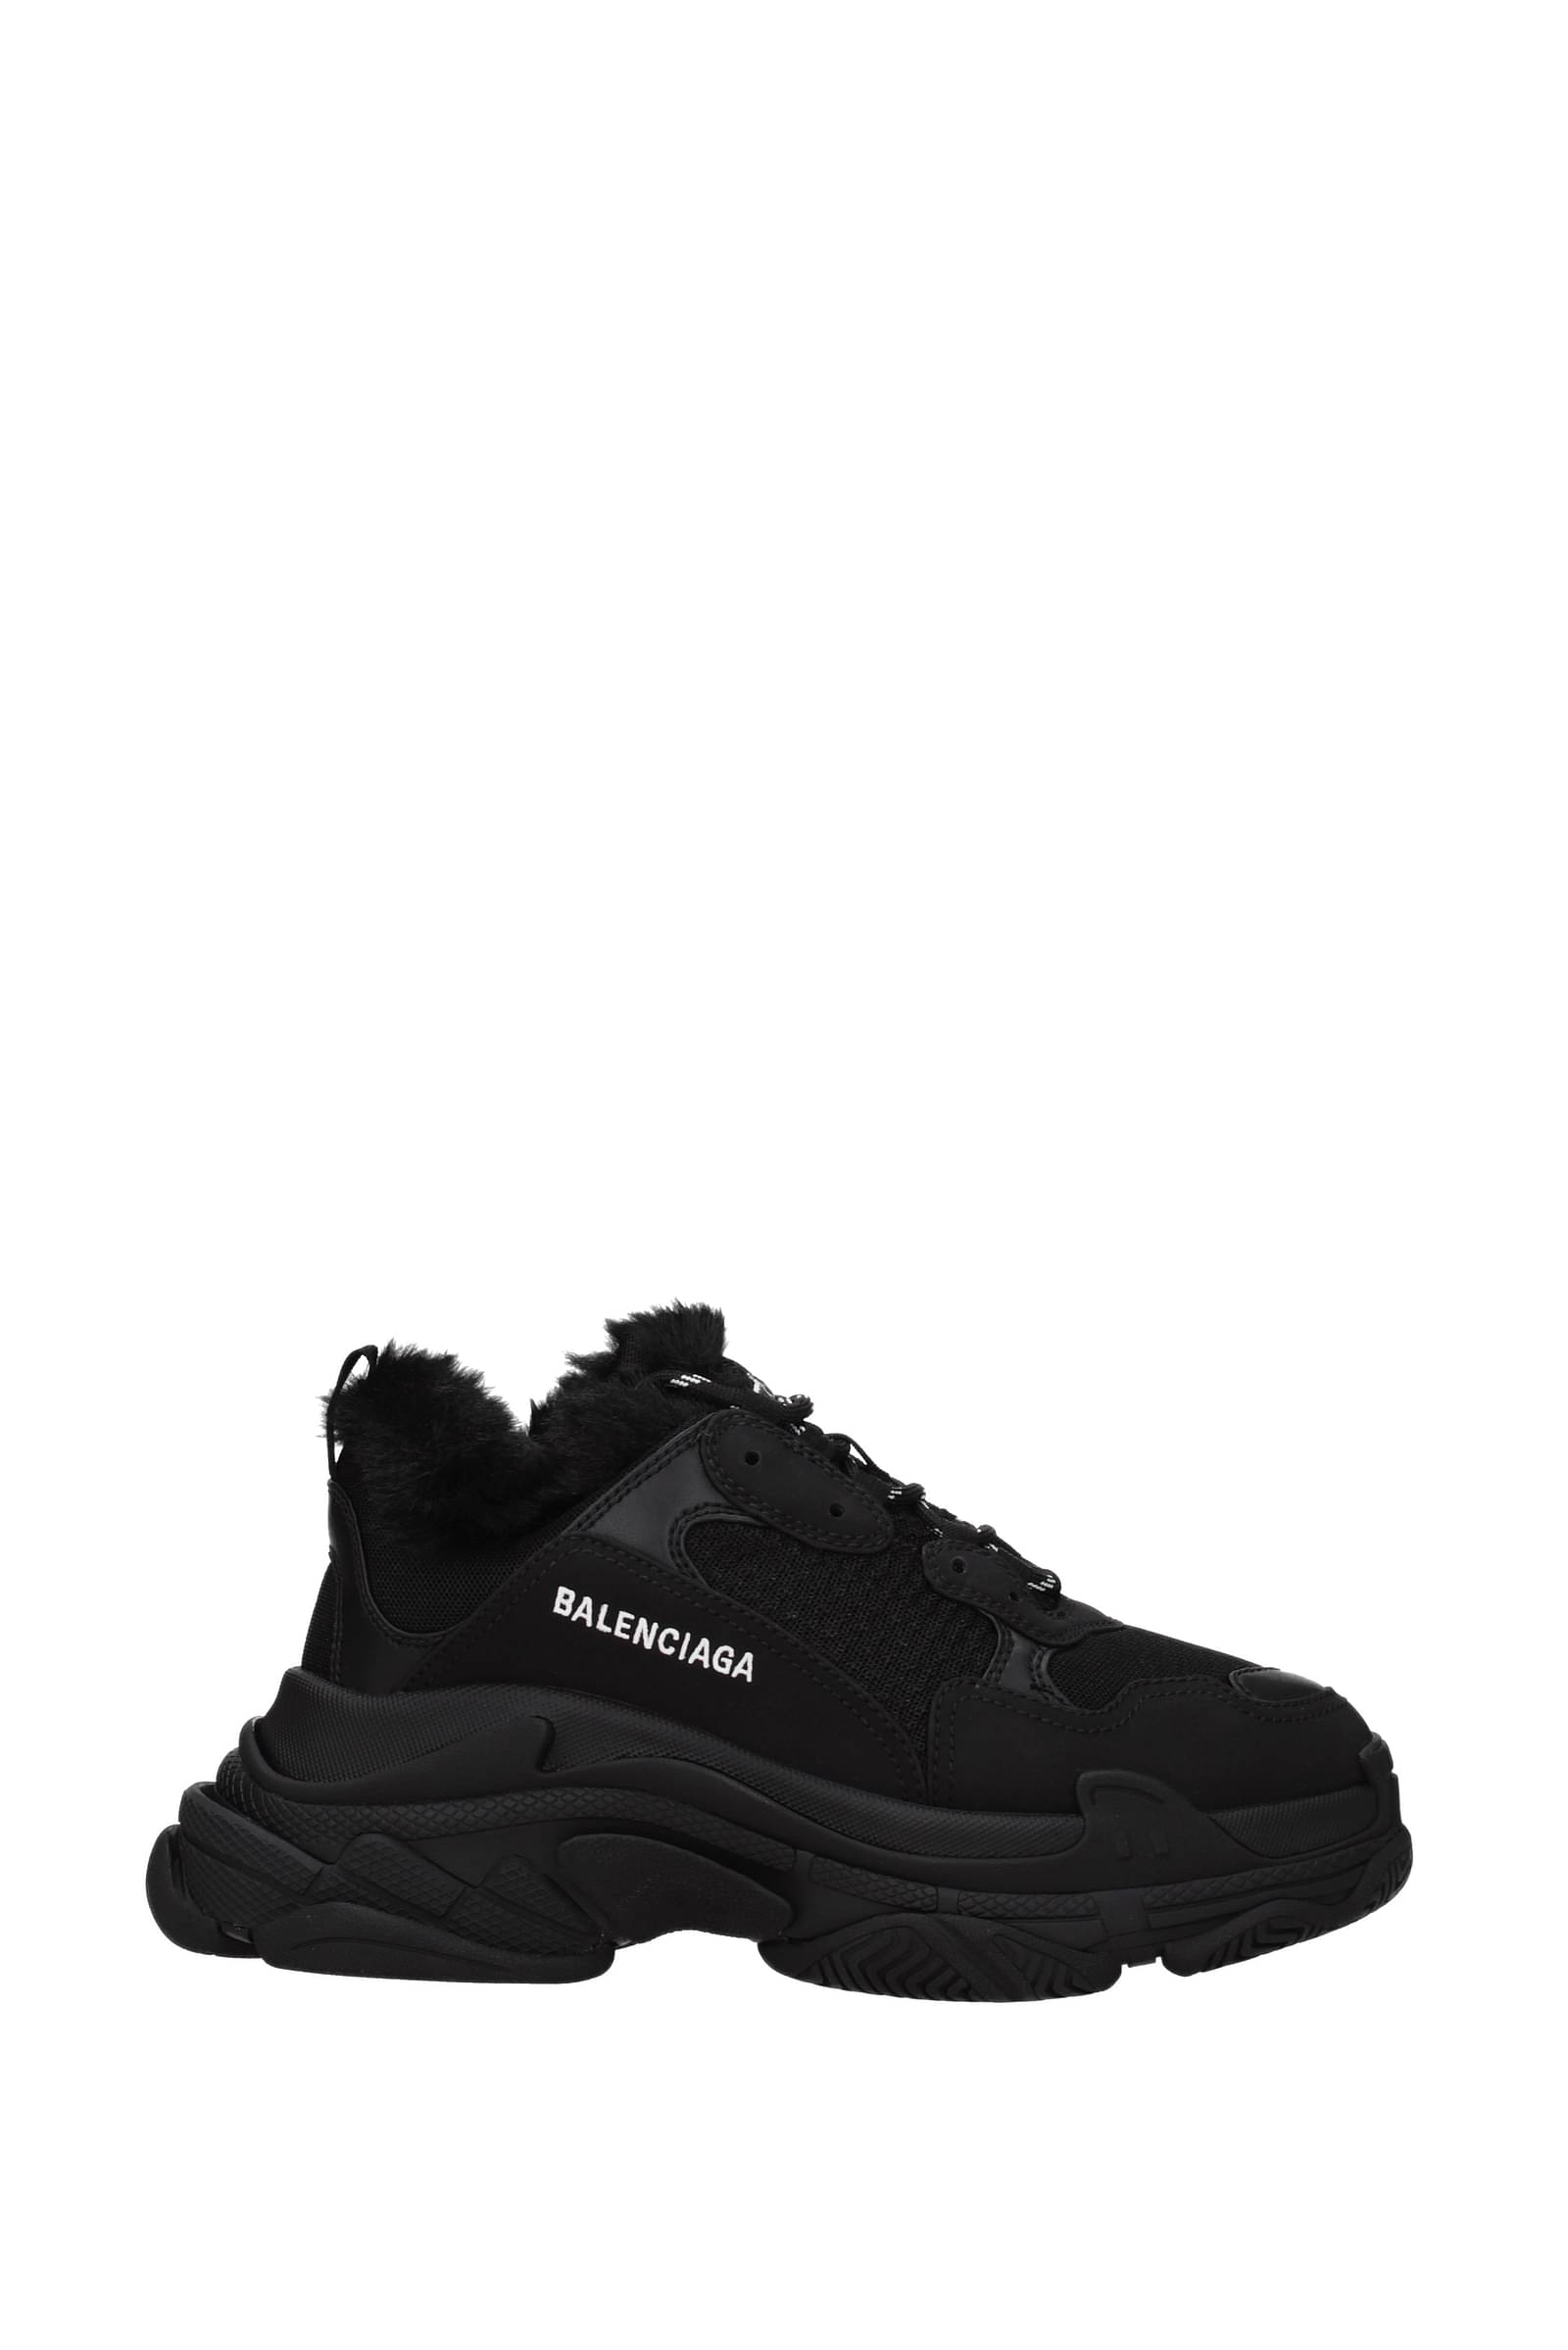 Buy Balenciaga Triple S All Black Sneakers Running Shoes for Men 43 Euro  at Amazonin